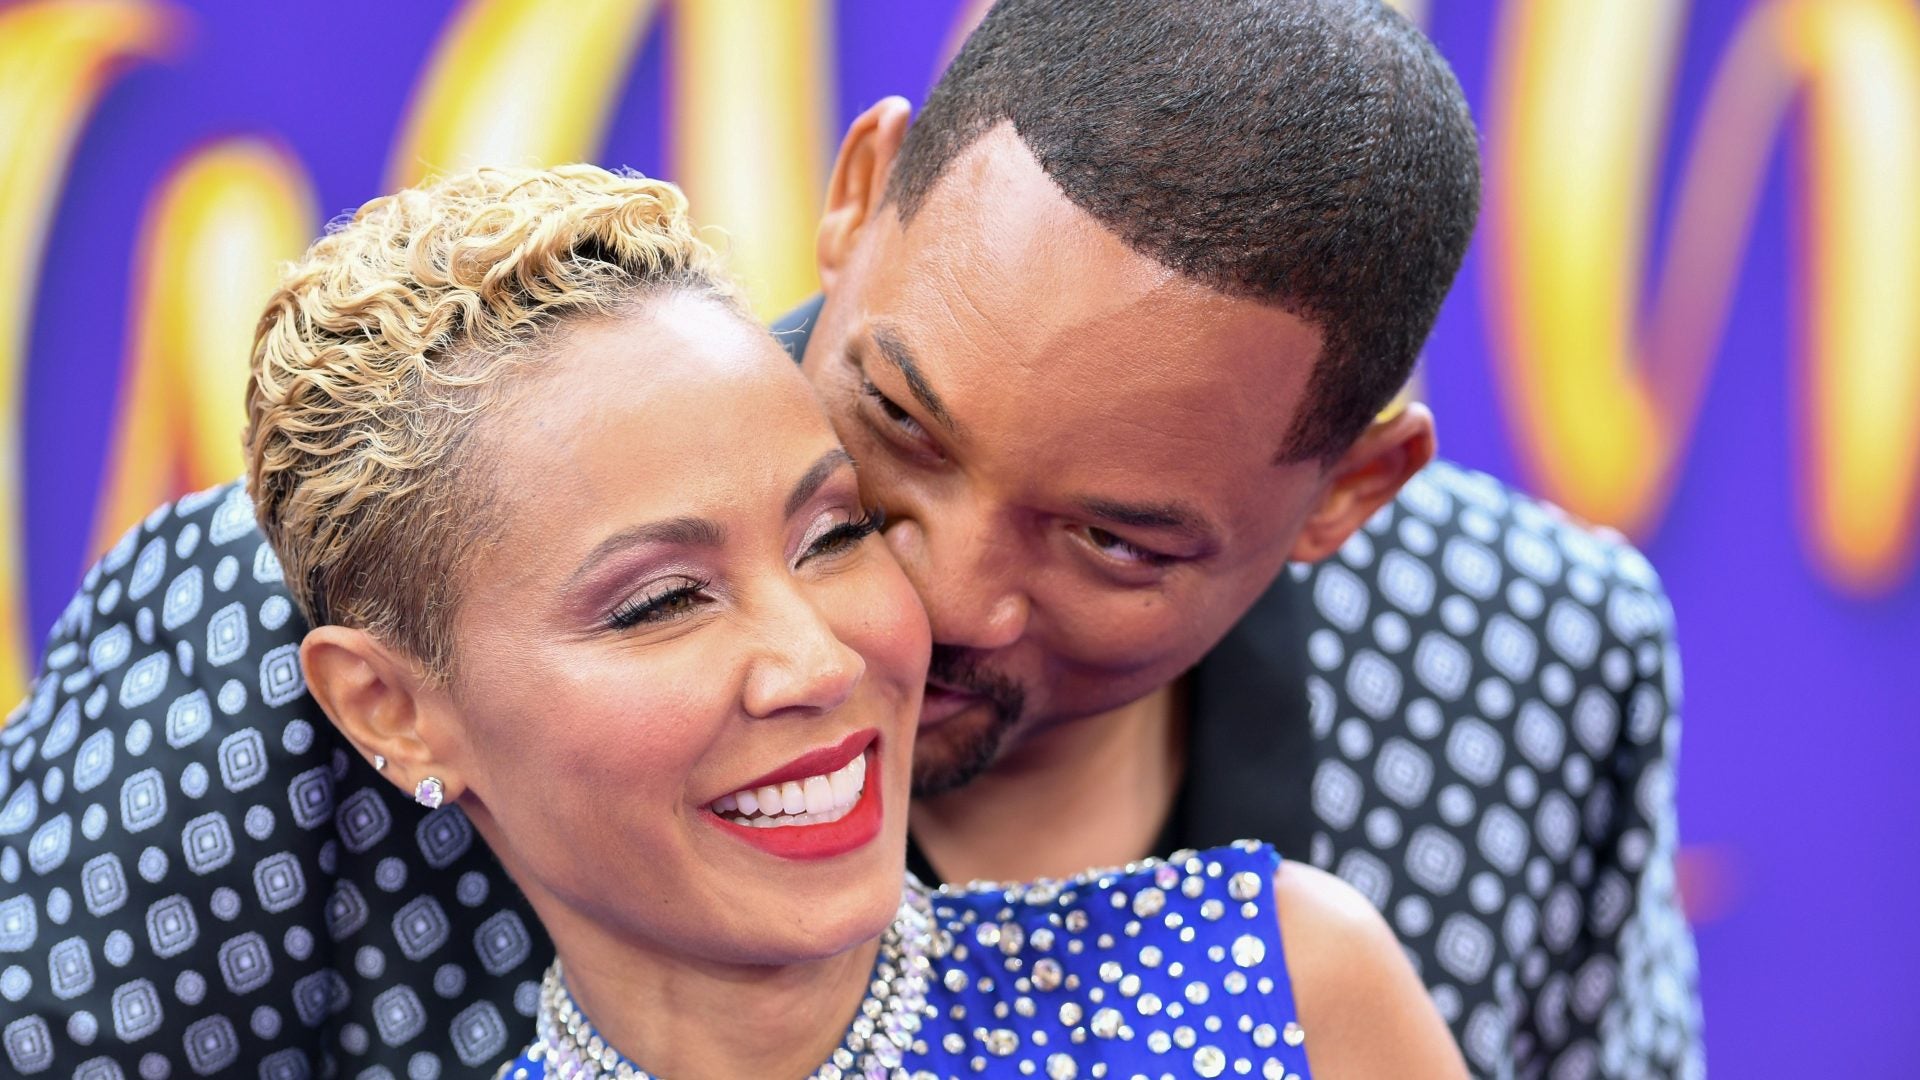 8 Celebrity Couples Who Aren't Afraid To Be Open About Their Relationships